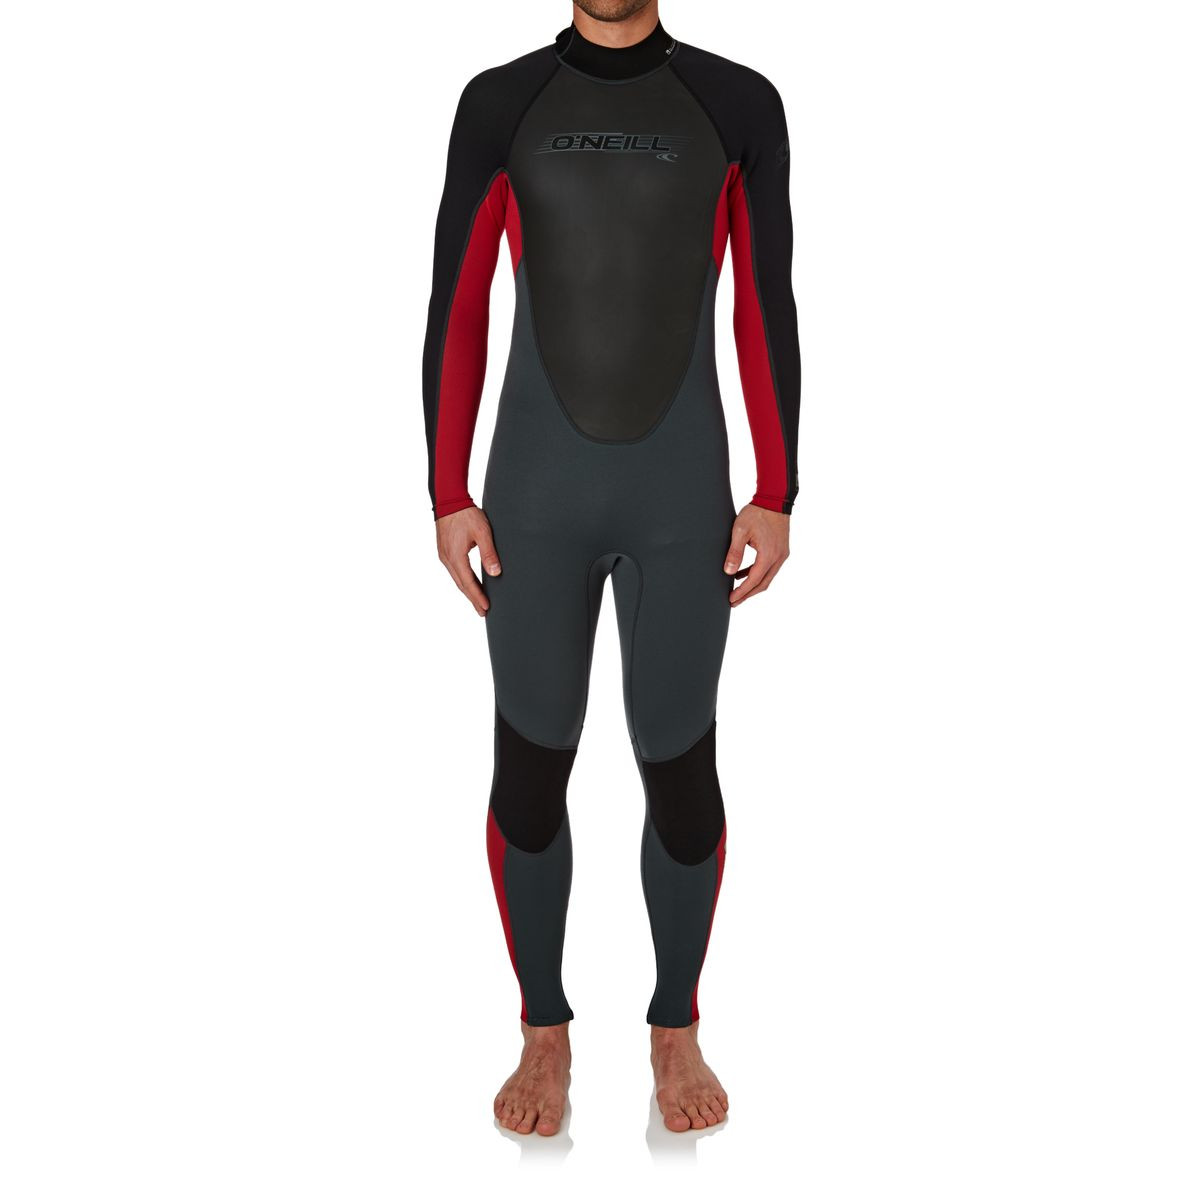 O'Neill Reactor 3/2mm 2017 Back Zip Wetsuit - Graphite/ Red/ Black